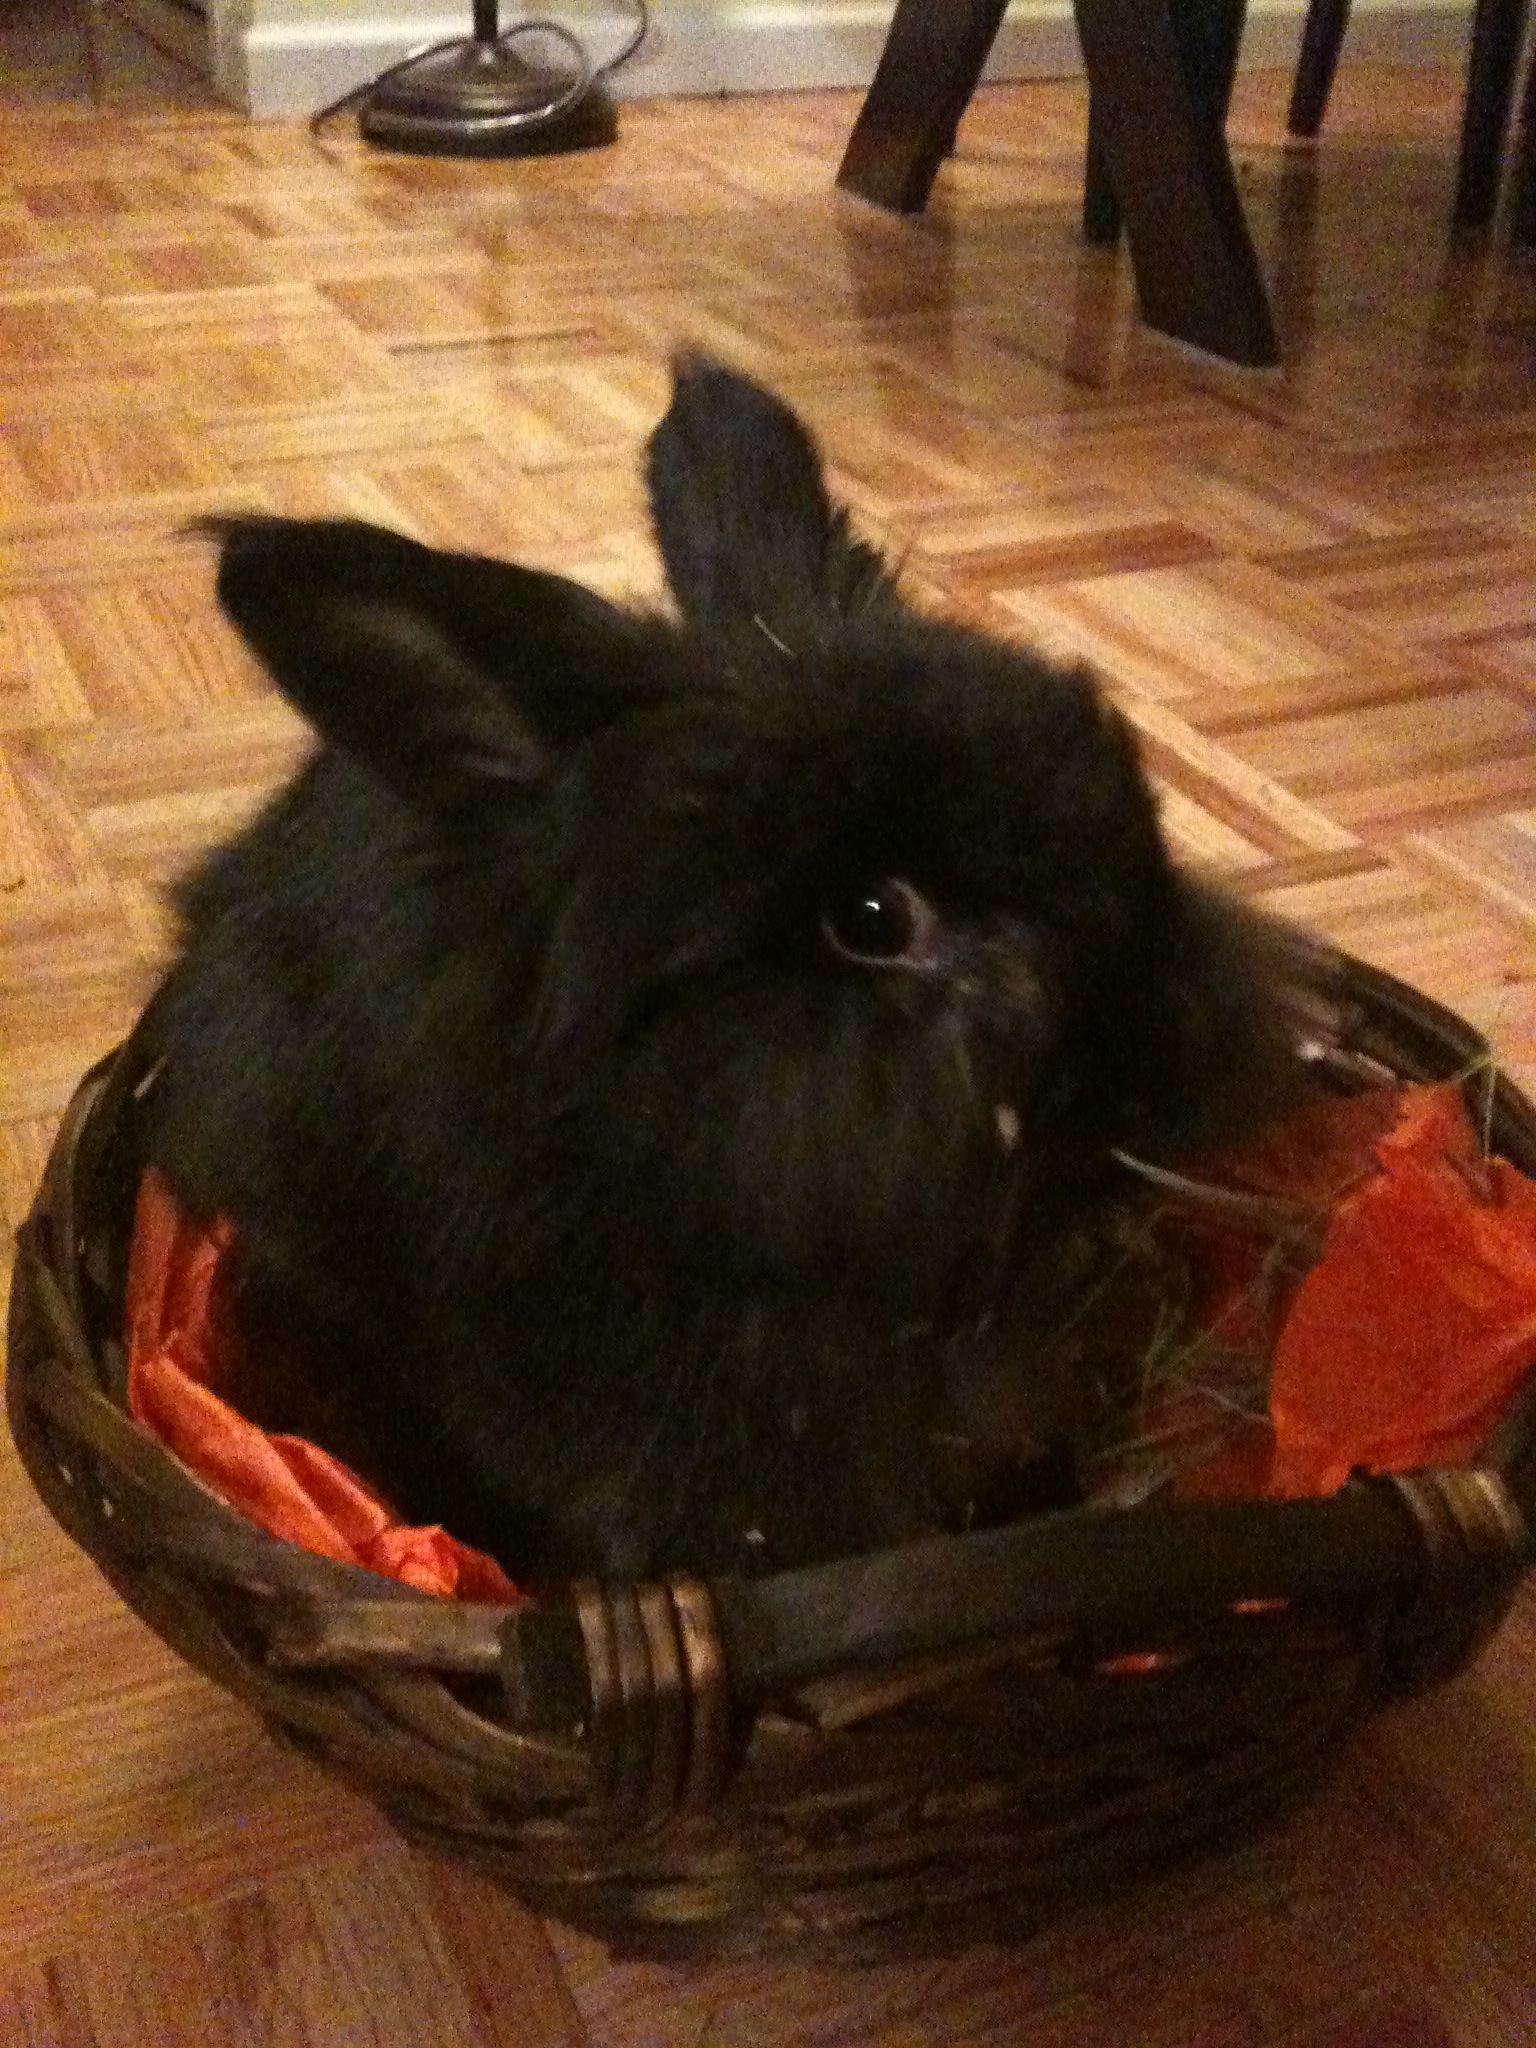 Bunny Brought Home Hay in Her Trick-or-Treat Basket